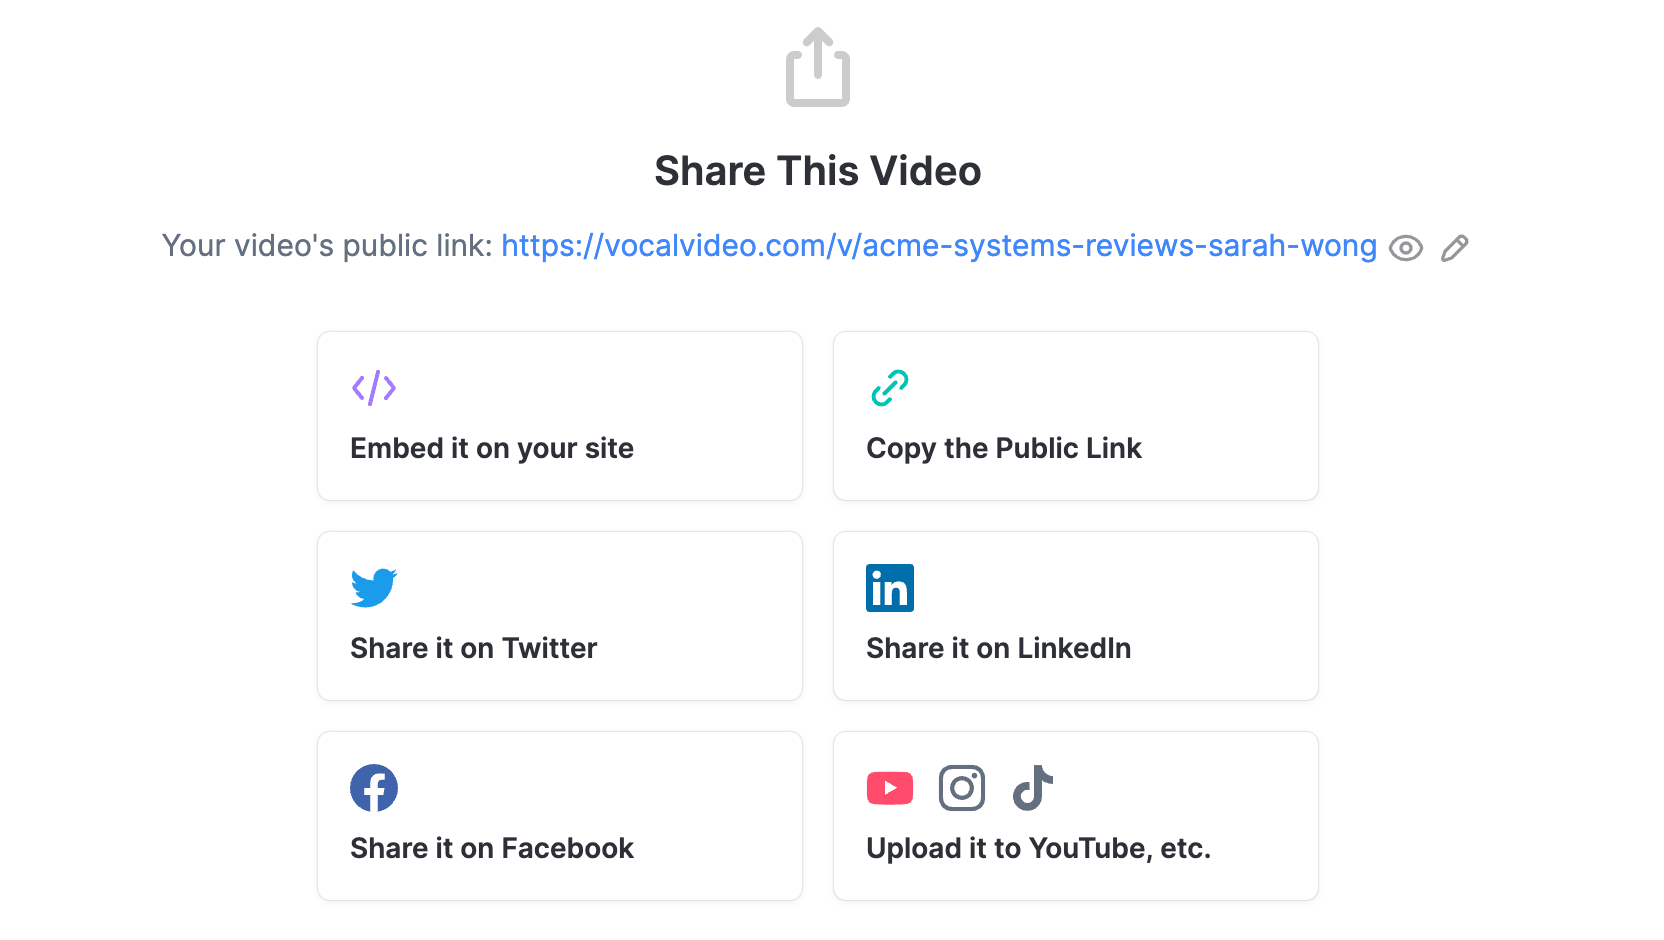 Share this video: Embed it on your site, Copy the public link, Share it on Twitter, LinkedIn, Facebook, Upload to YouTube, etc.